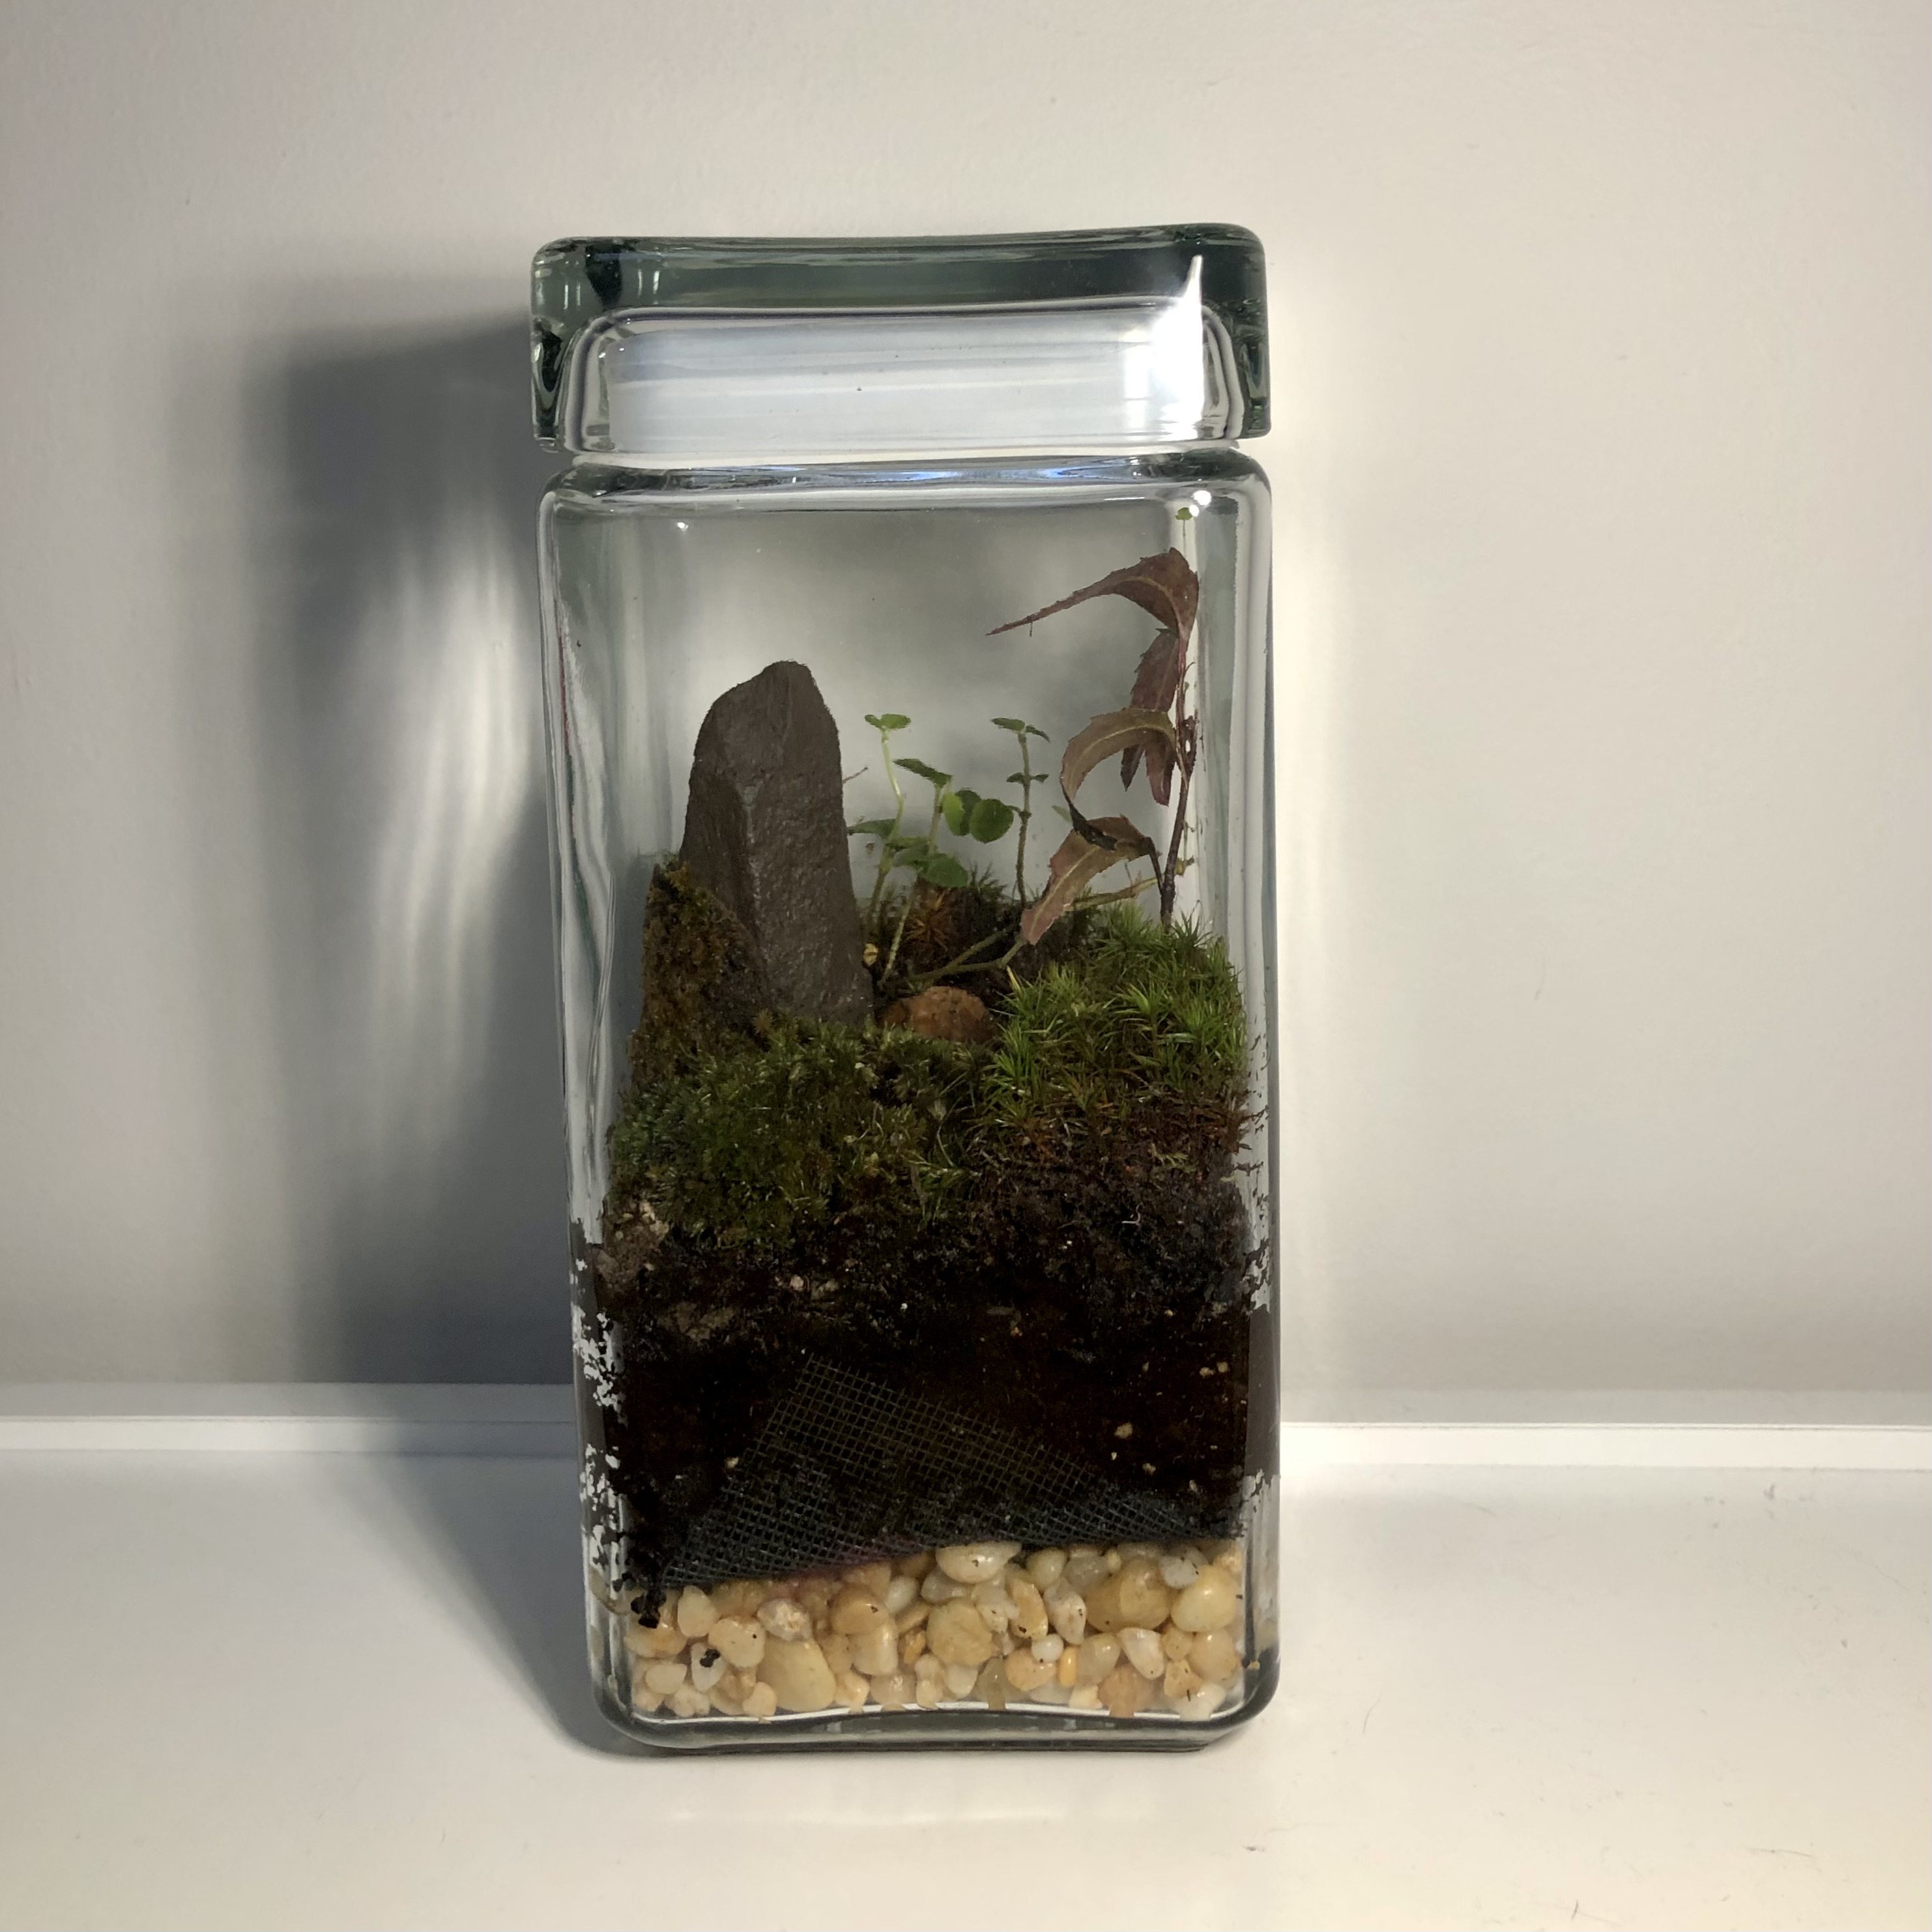 through the glass of the back view of the rectangular terrarium, there's gravel and soil at the bottom, and on top, there's a pointy rock on the left side, with moss and plants.